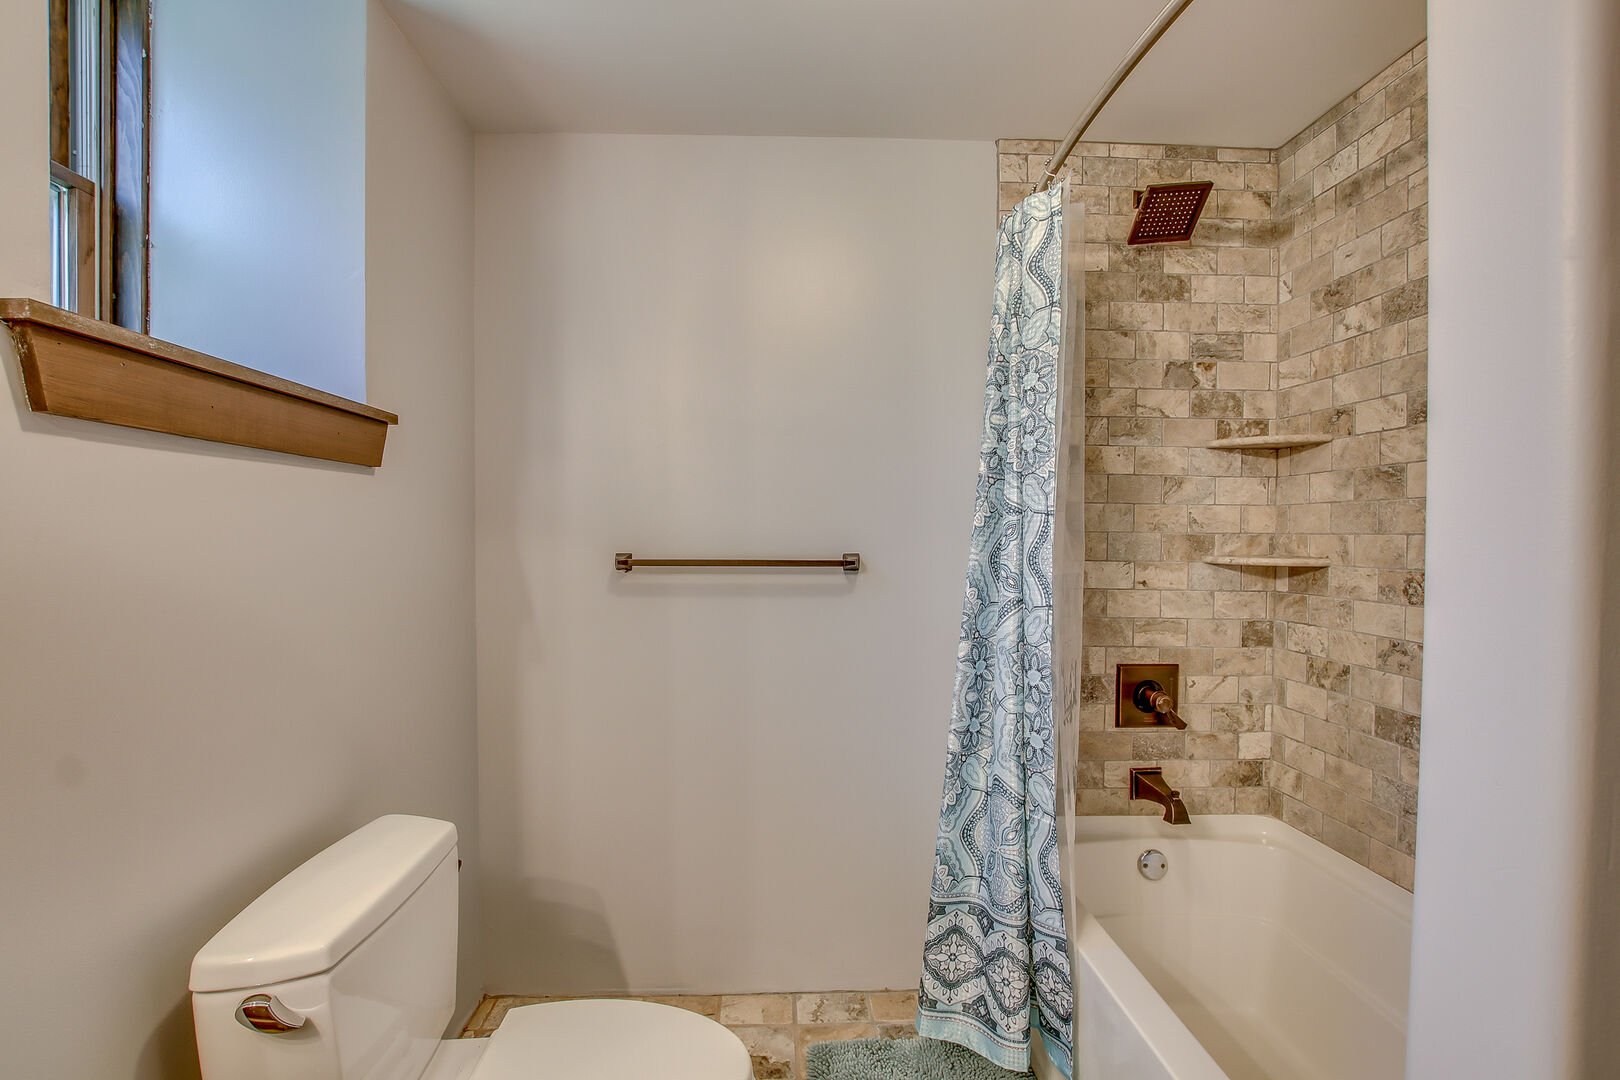 Bathroom with tiled shower with the curtain open and a toilet in the bottom left.